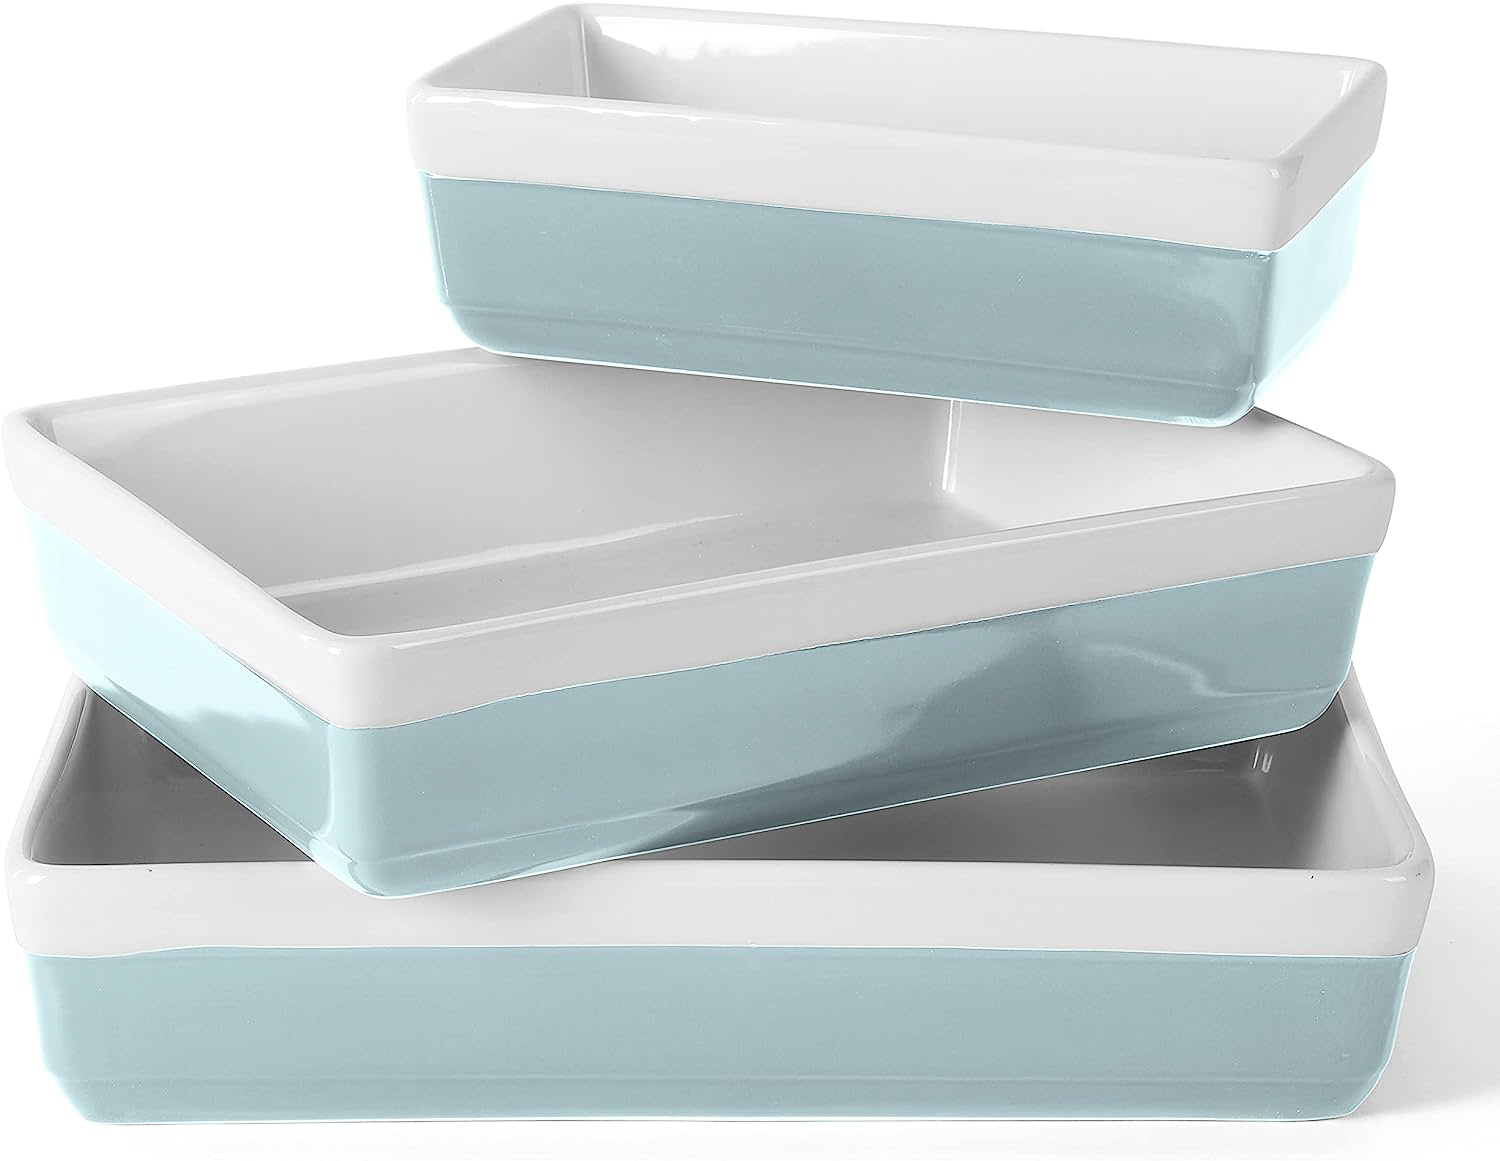 Dusty blue and white bakeware set (Prime Day deal)